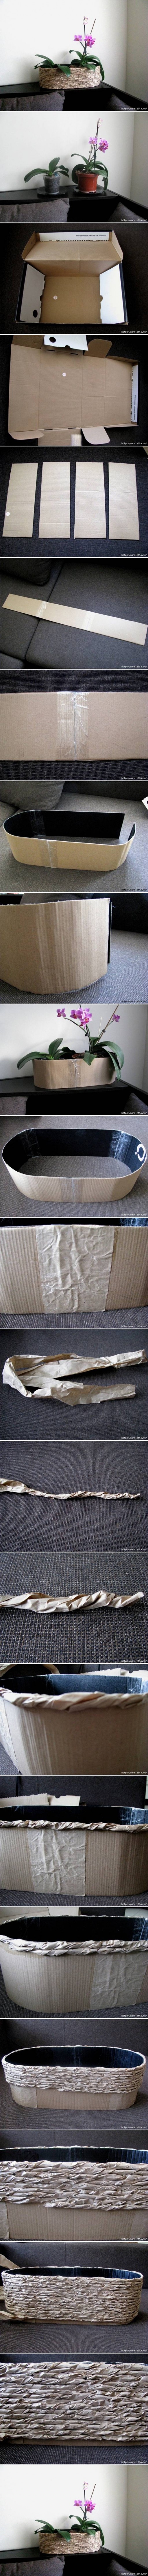 packing paper and cardboard planter